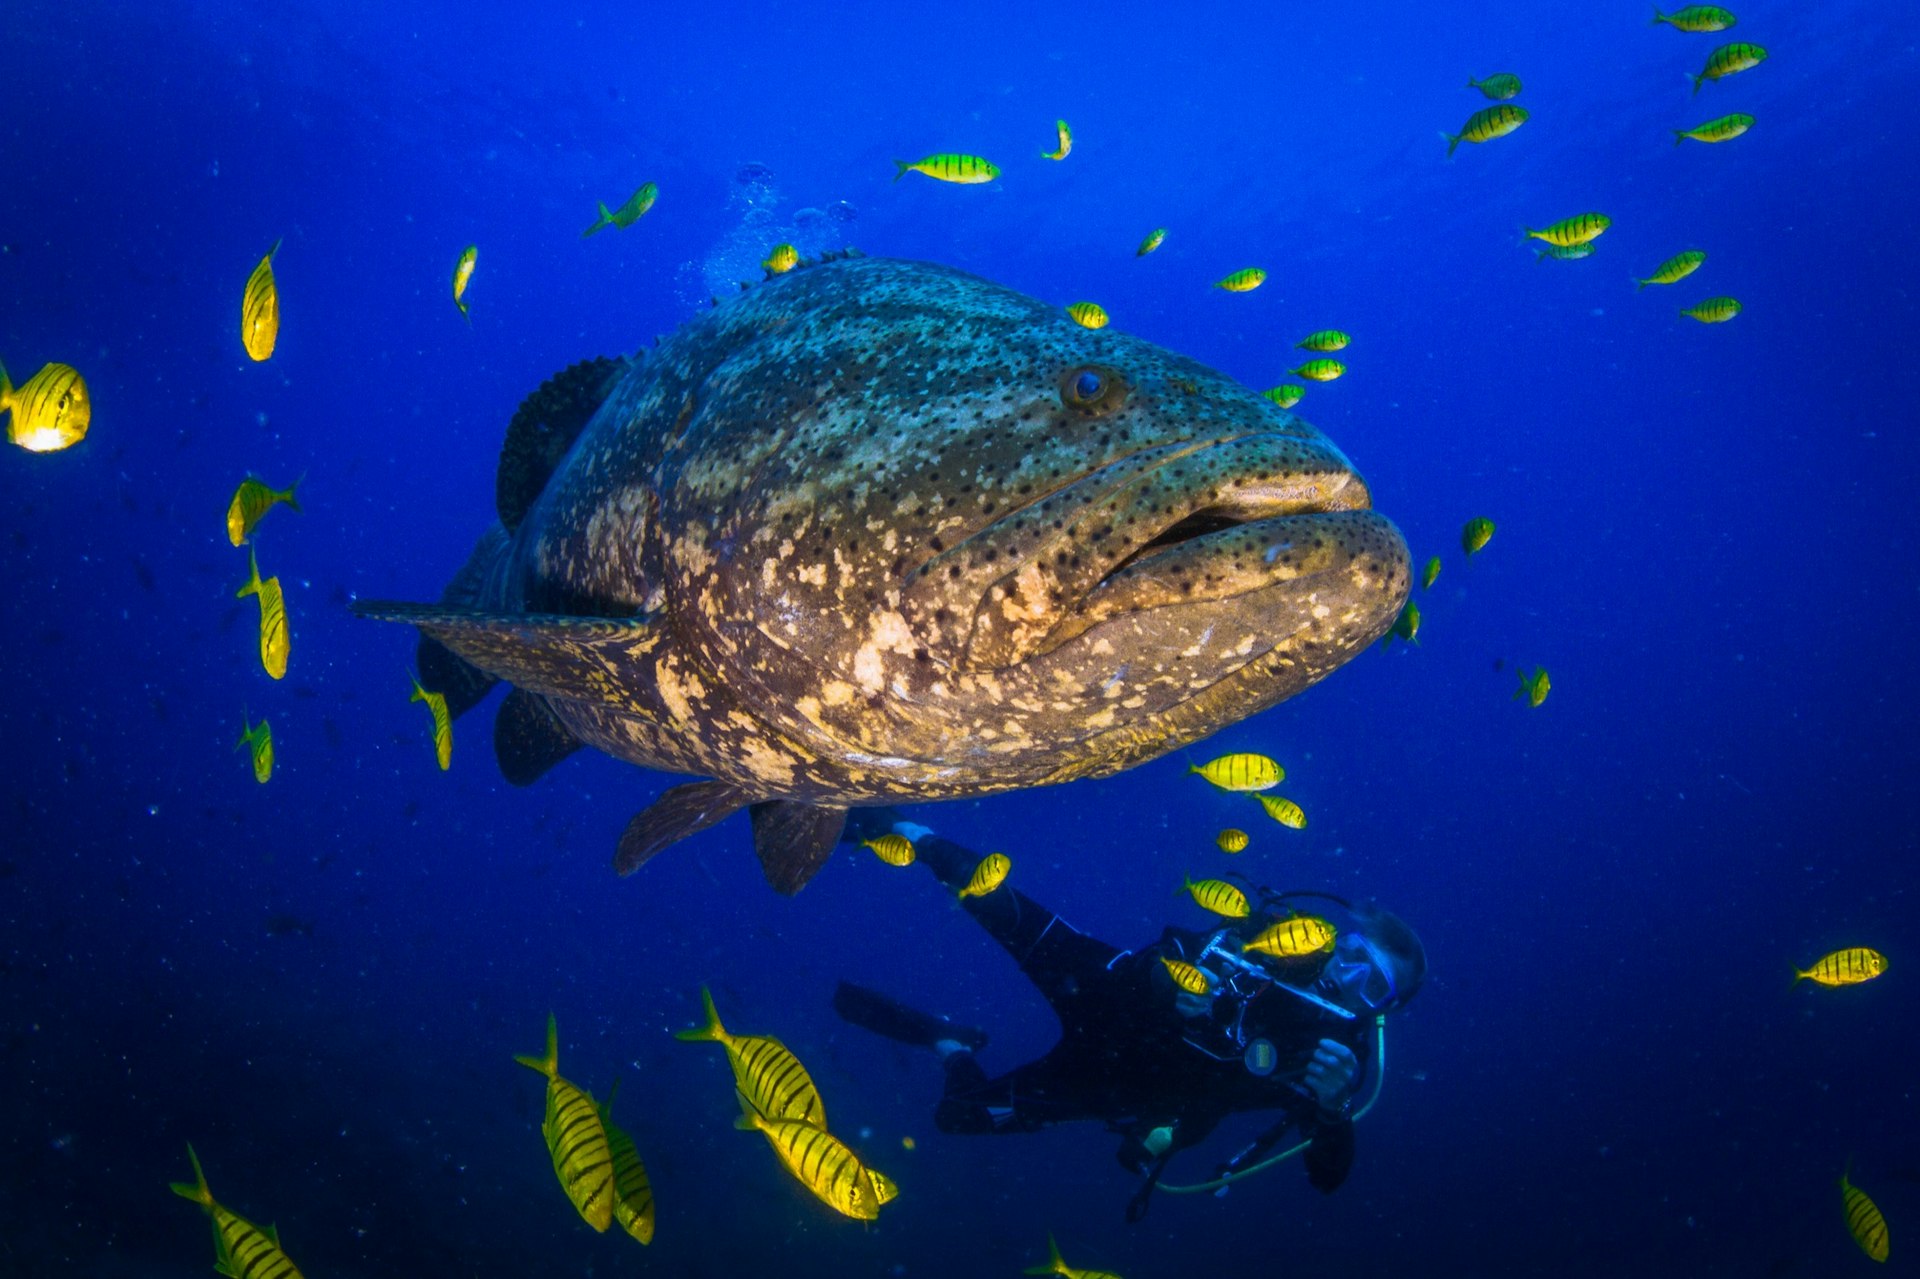 A diver records a large giant potato grouper swimming near the Coiba Islands in Panama. A school of yellow fish surround the grouper.